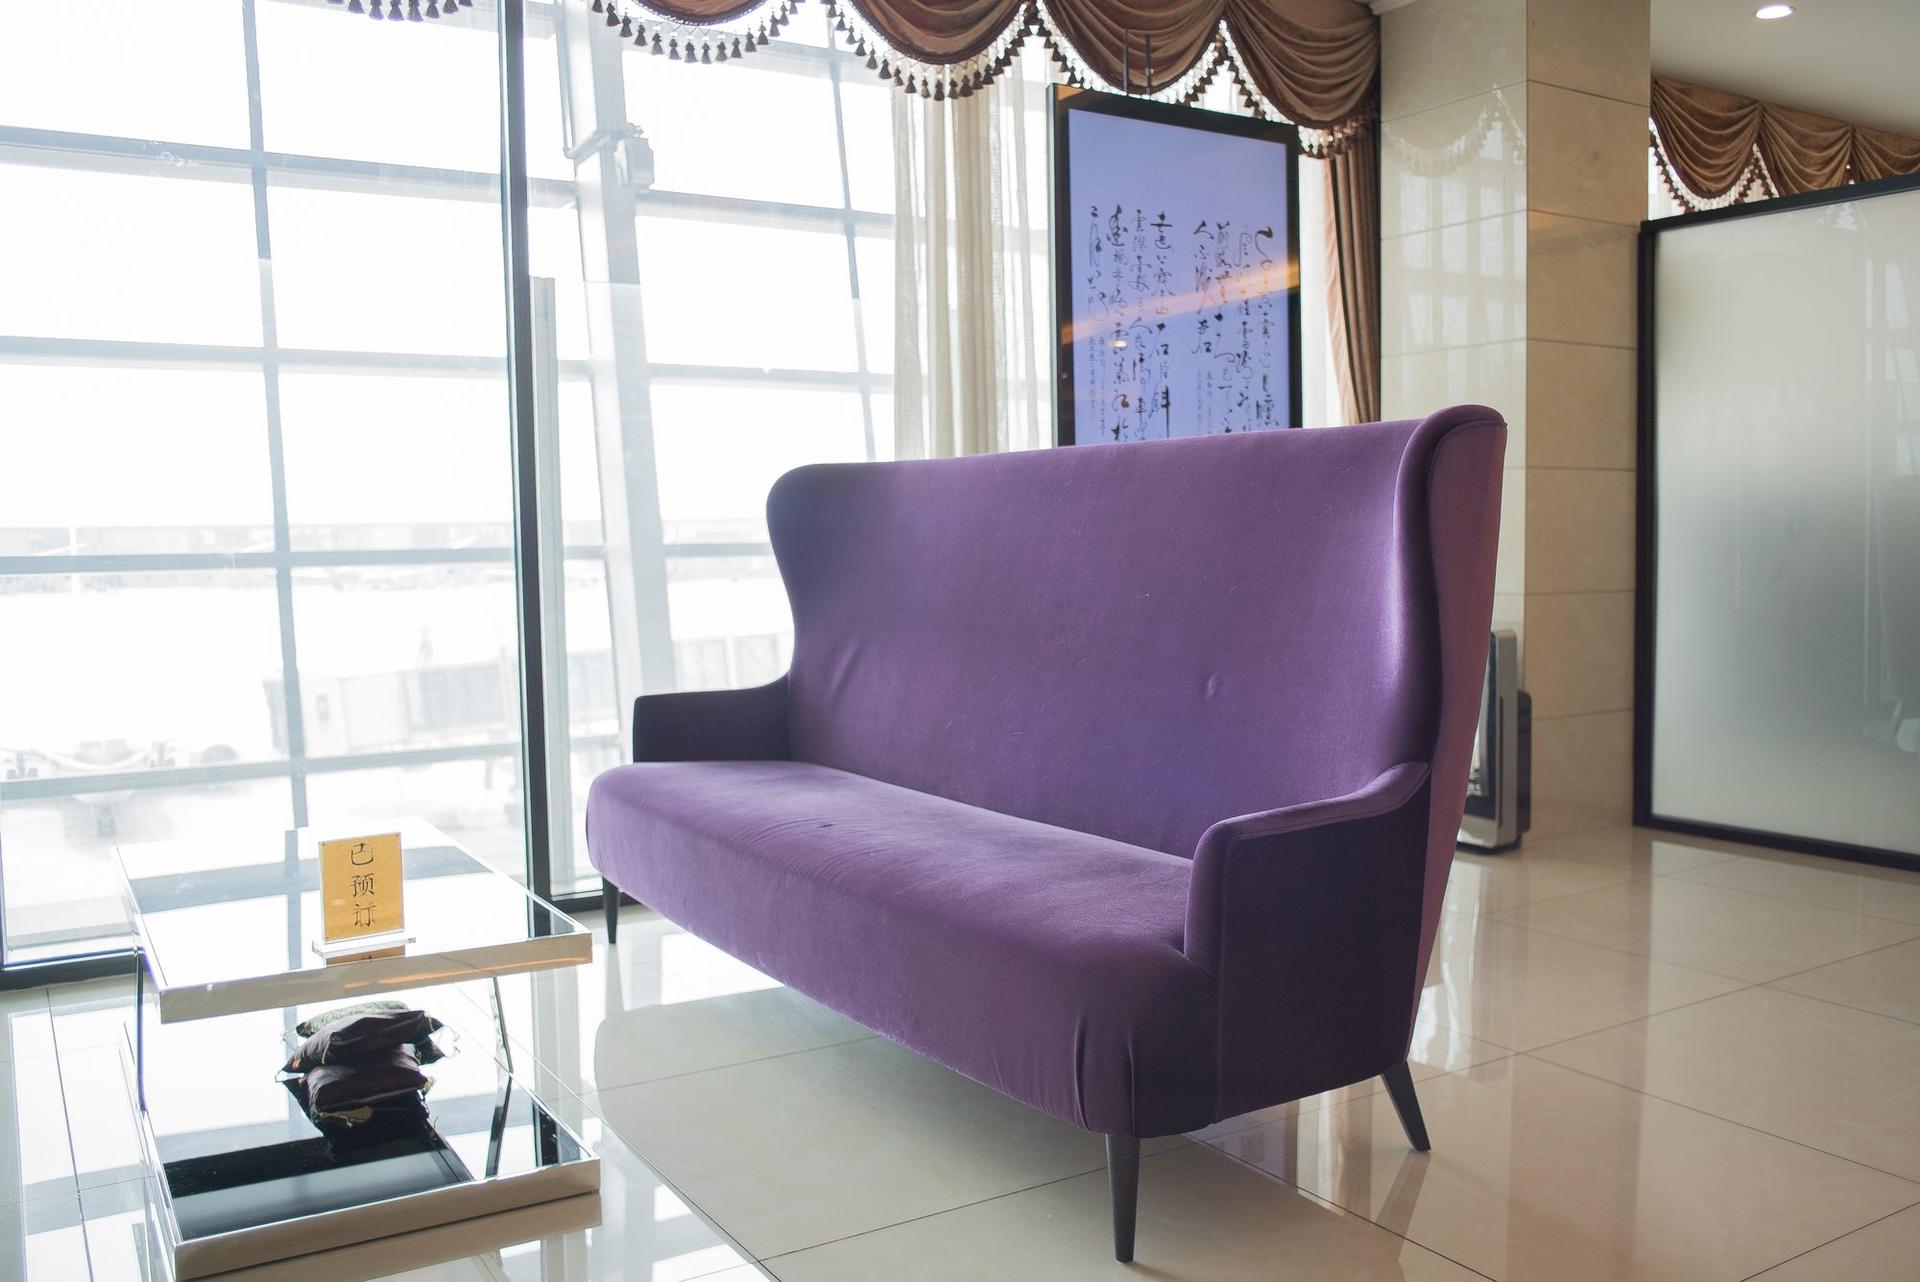 Tianjin Airlines Lounge image 11 of 13